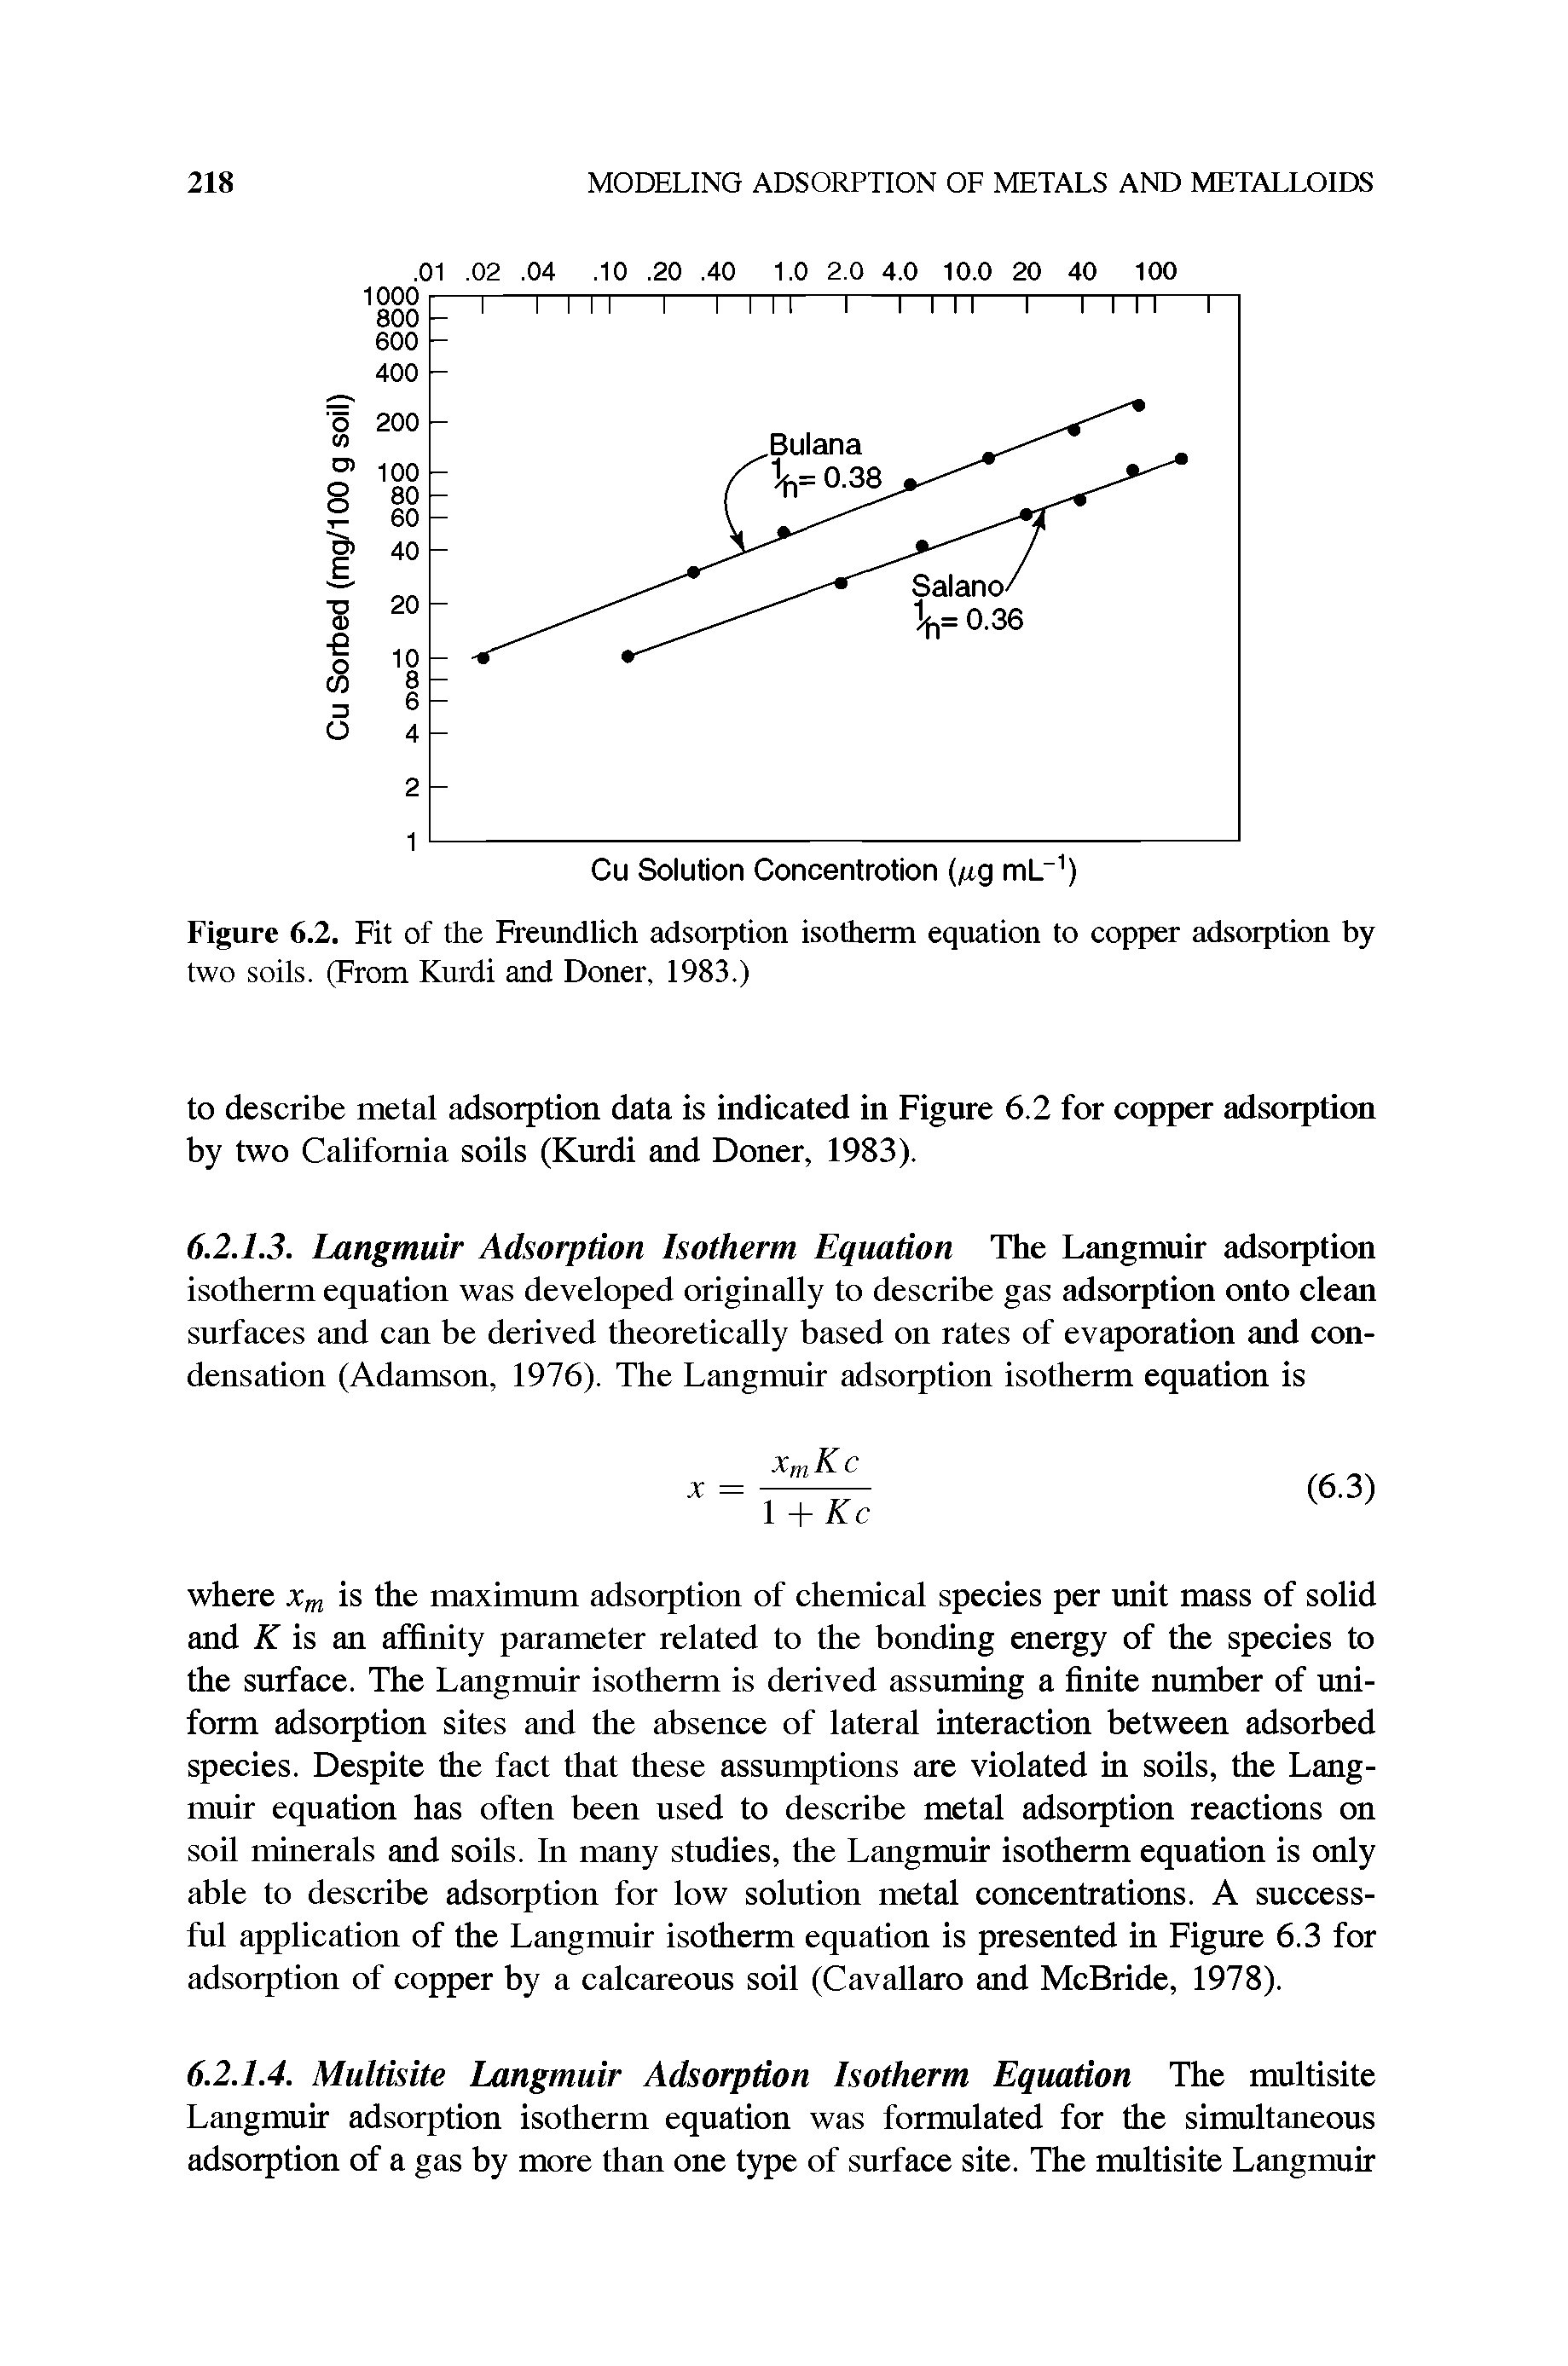 Figure 6.2. Fit of the Freundlich adsoiption isotherm equation to copper adsorption by two soils. (From Kurdi and Doner, 1983.)...